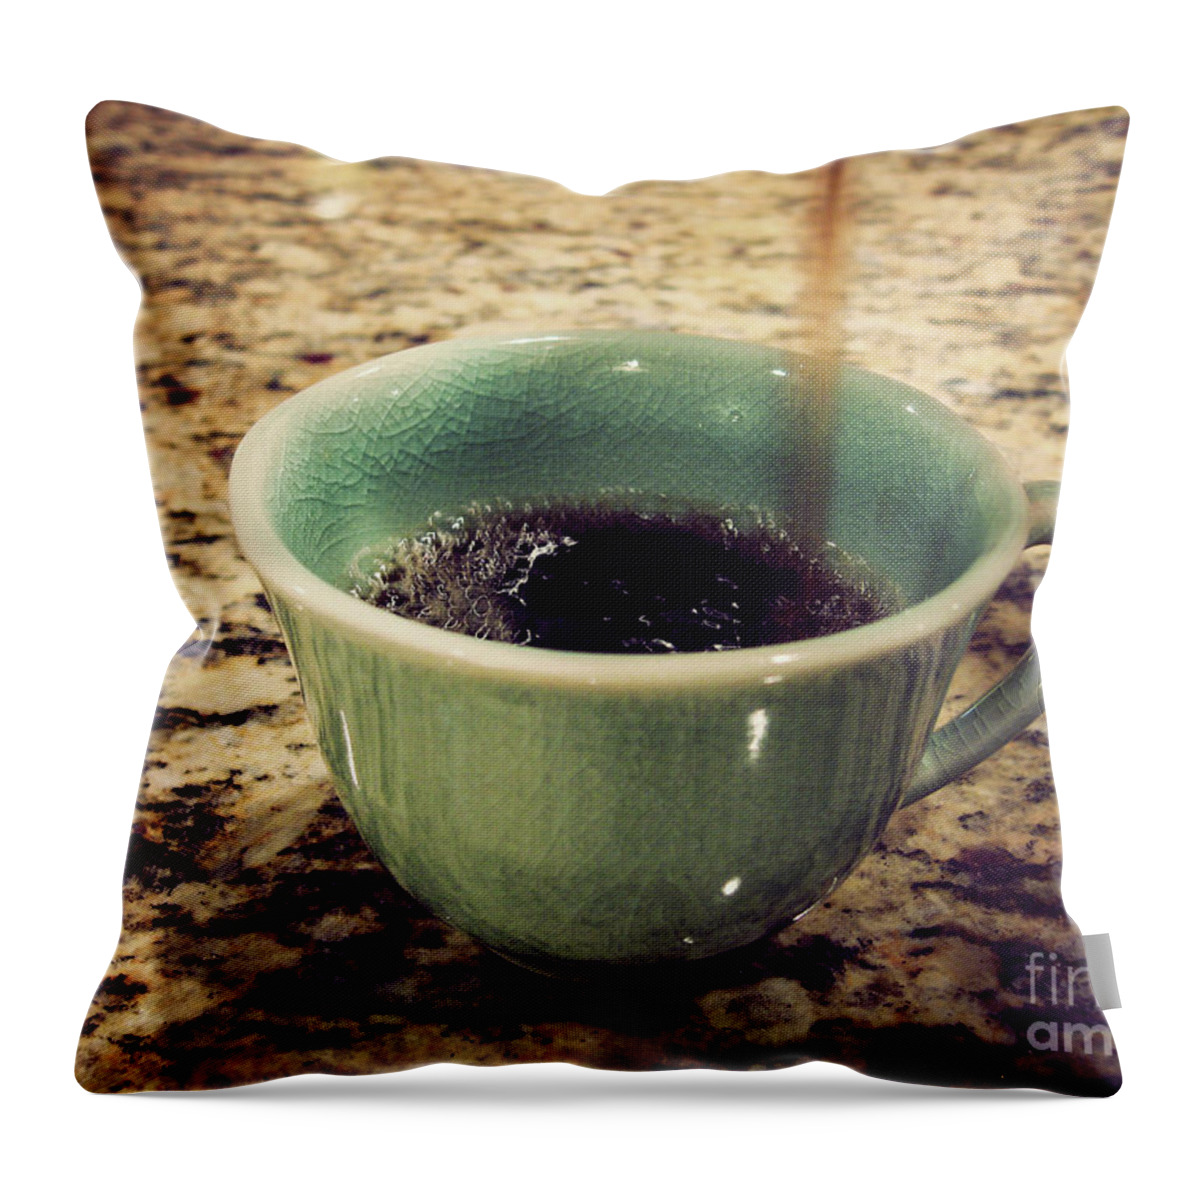 California Throw Pillow featuring the photograph Coffee Being Poured Into Cup by Shari Weaver Photography